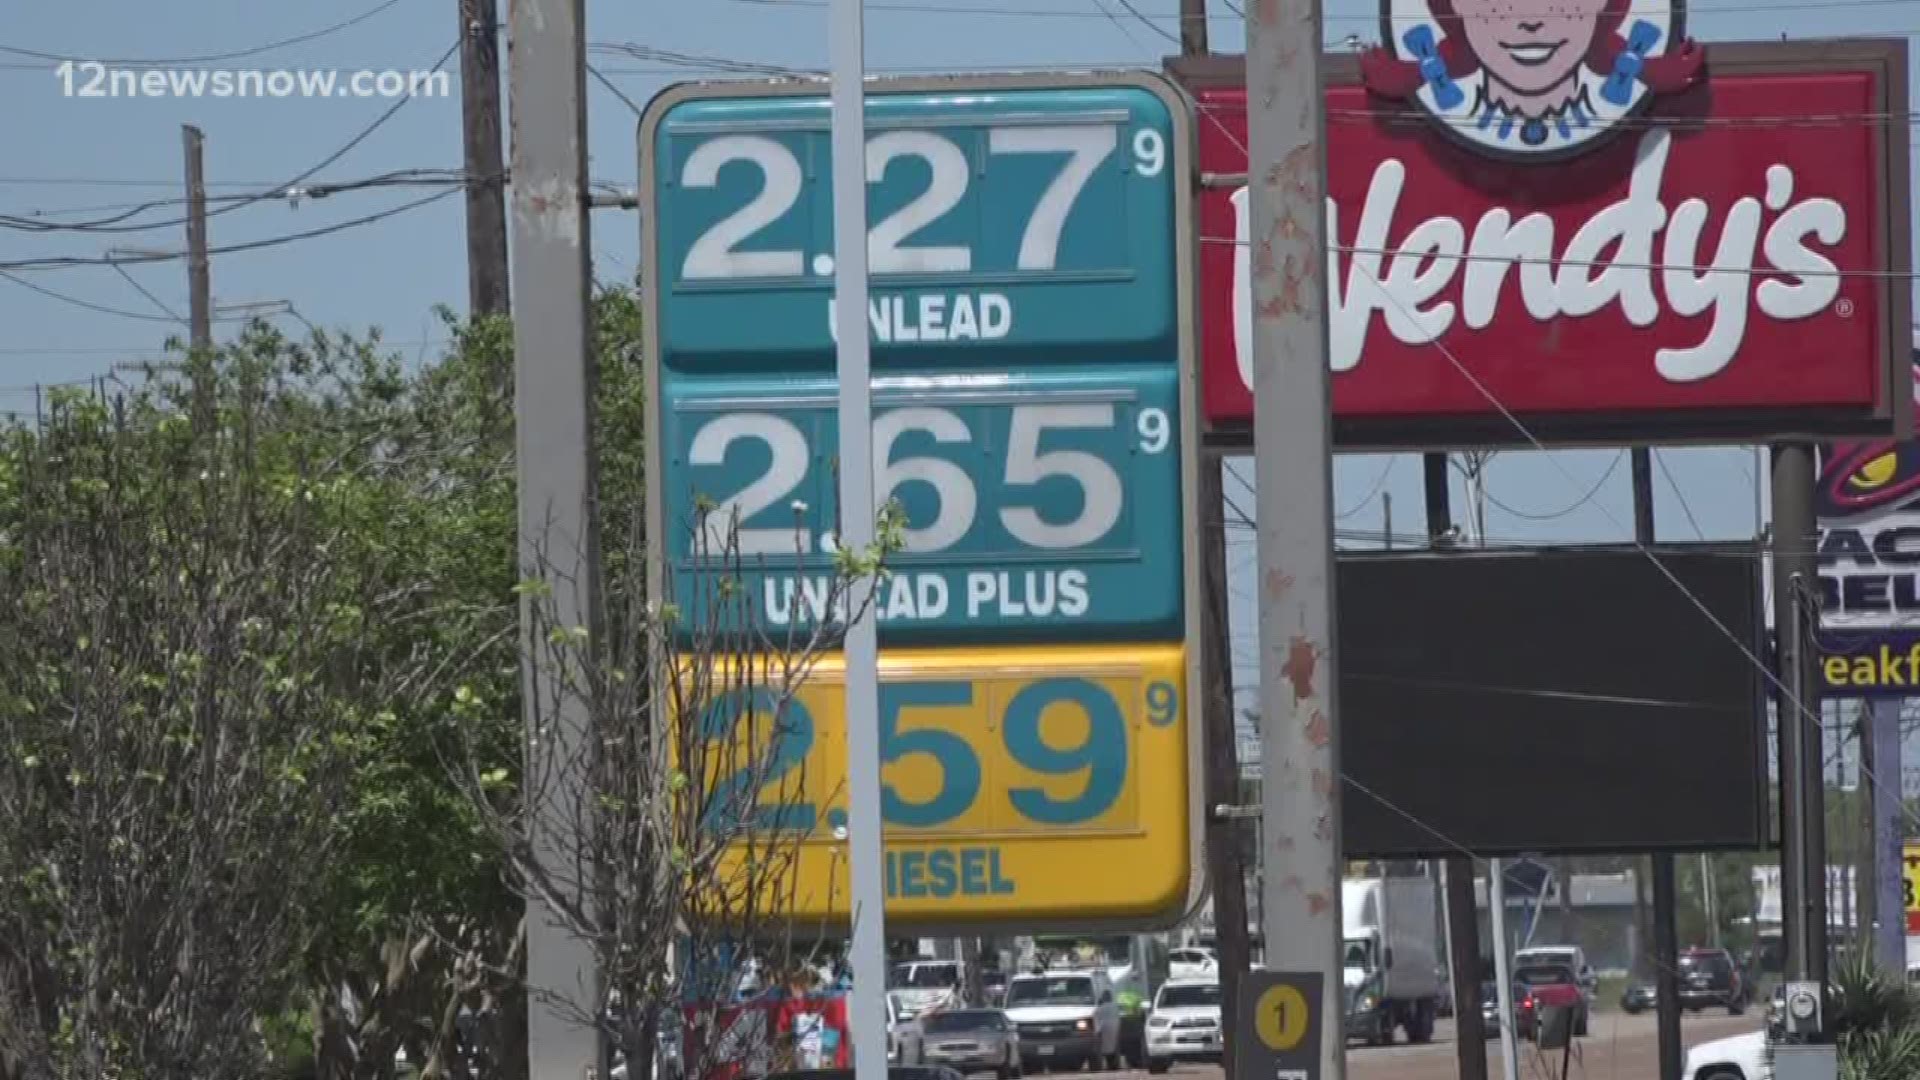 One man says he uses gift cards to pay for gas to keep from having information stolen.